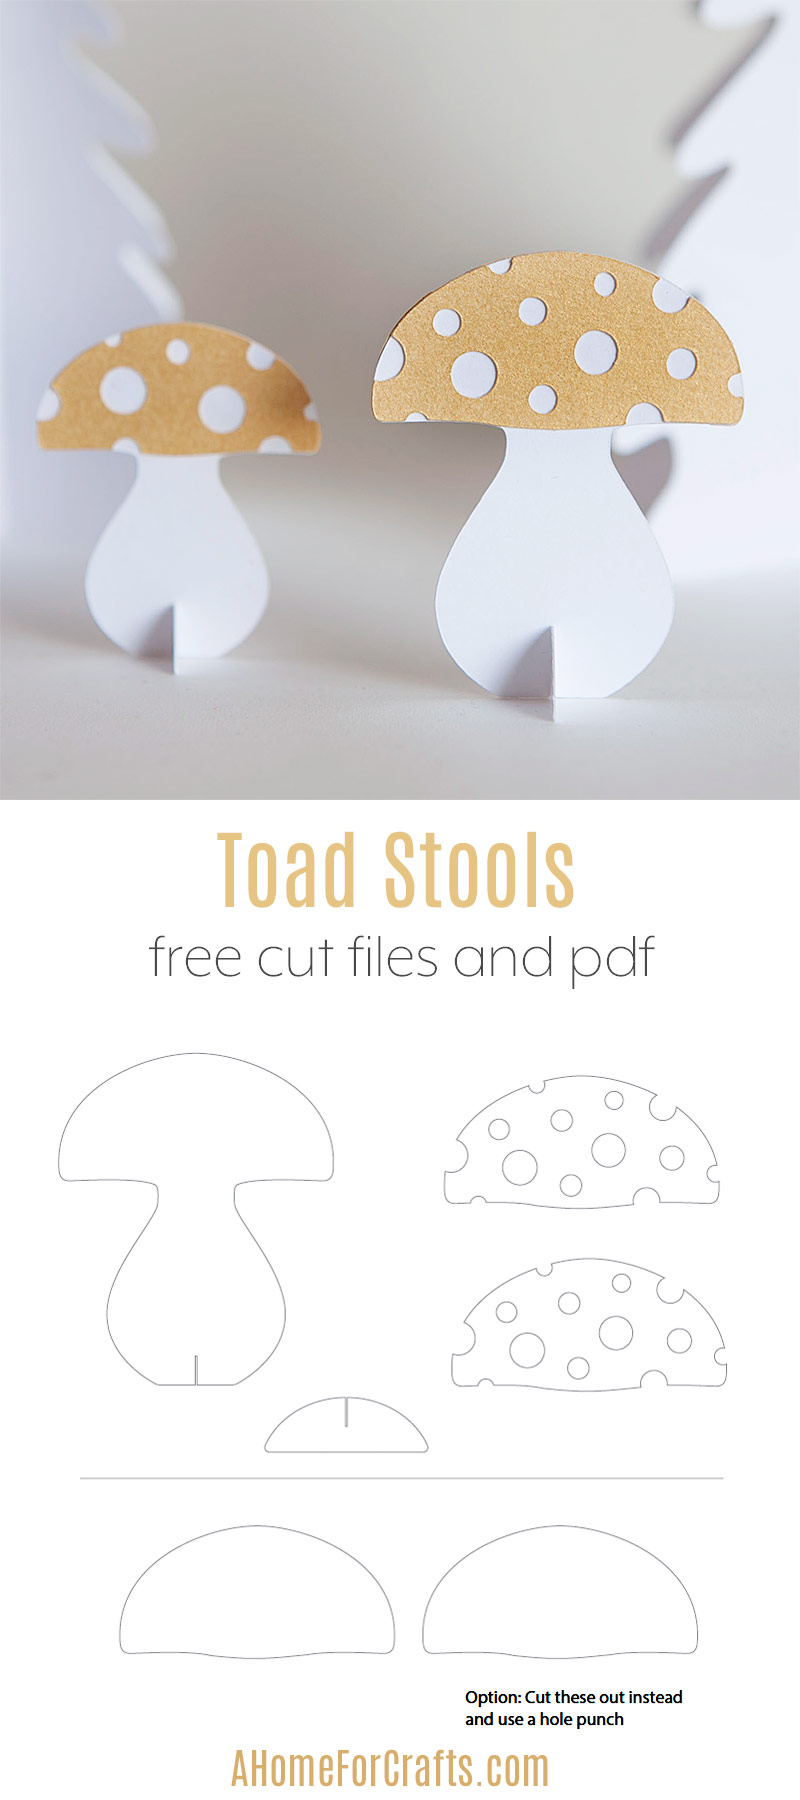 Make these charming toad stools a staple in your Christmas decor - free printable and cut files